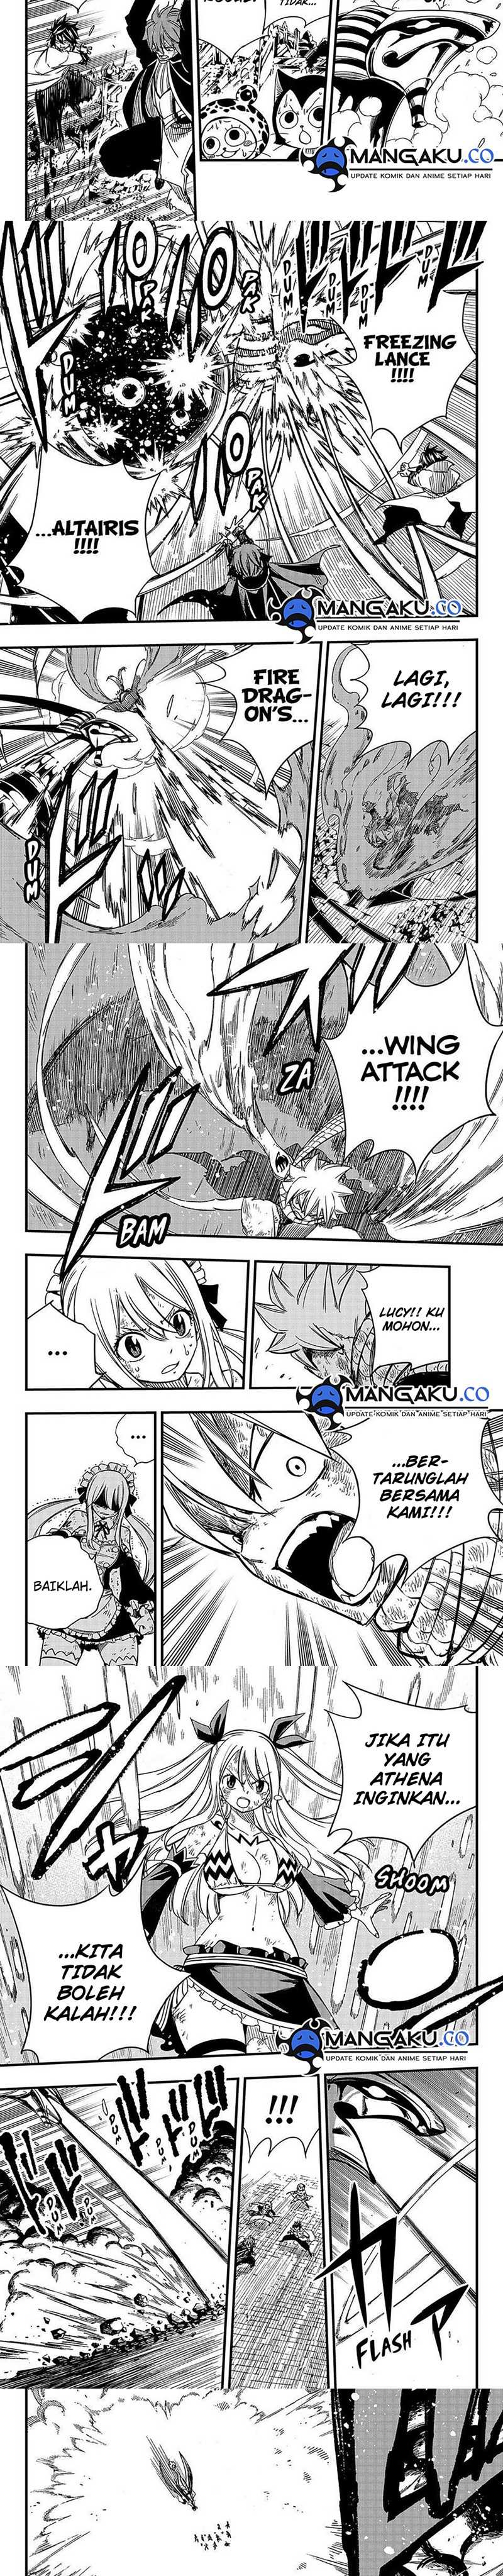 Fairy Tail: 100 Years Quest Chapter 150